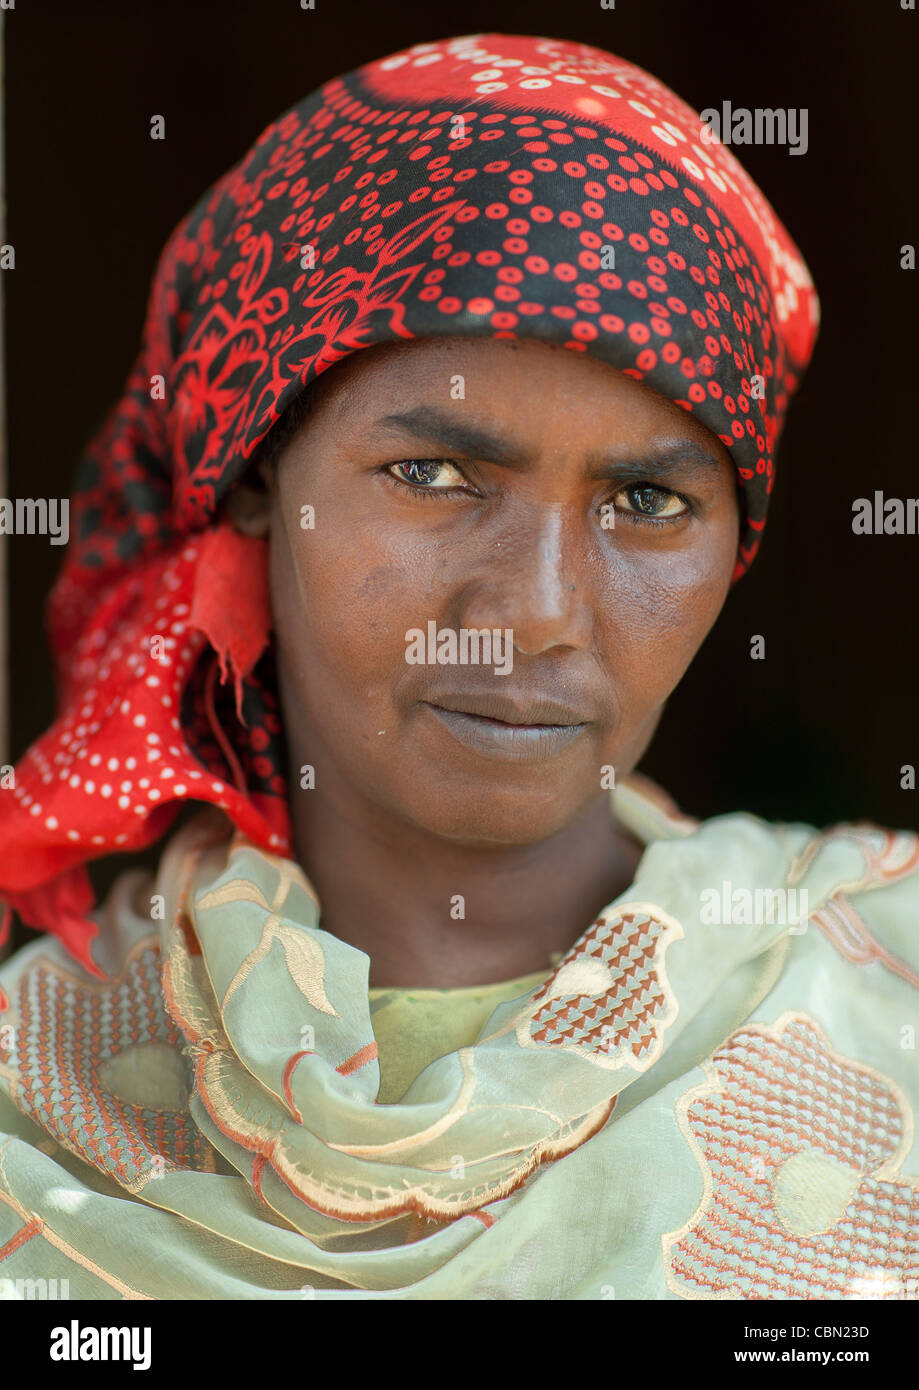 Mature Woman Wearing Veil Portrait In Hargeisa Somaliland Stock Photo